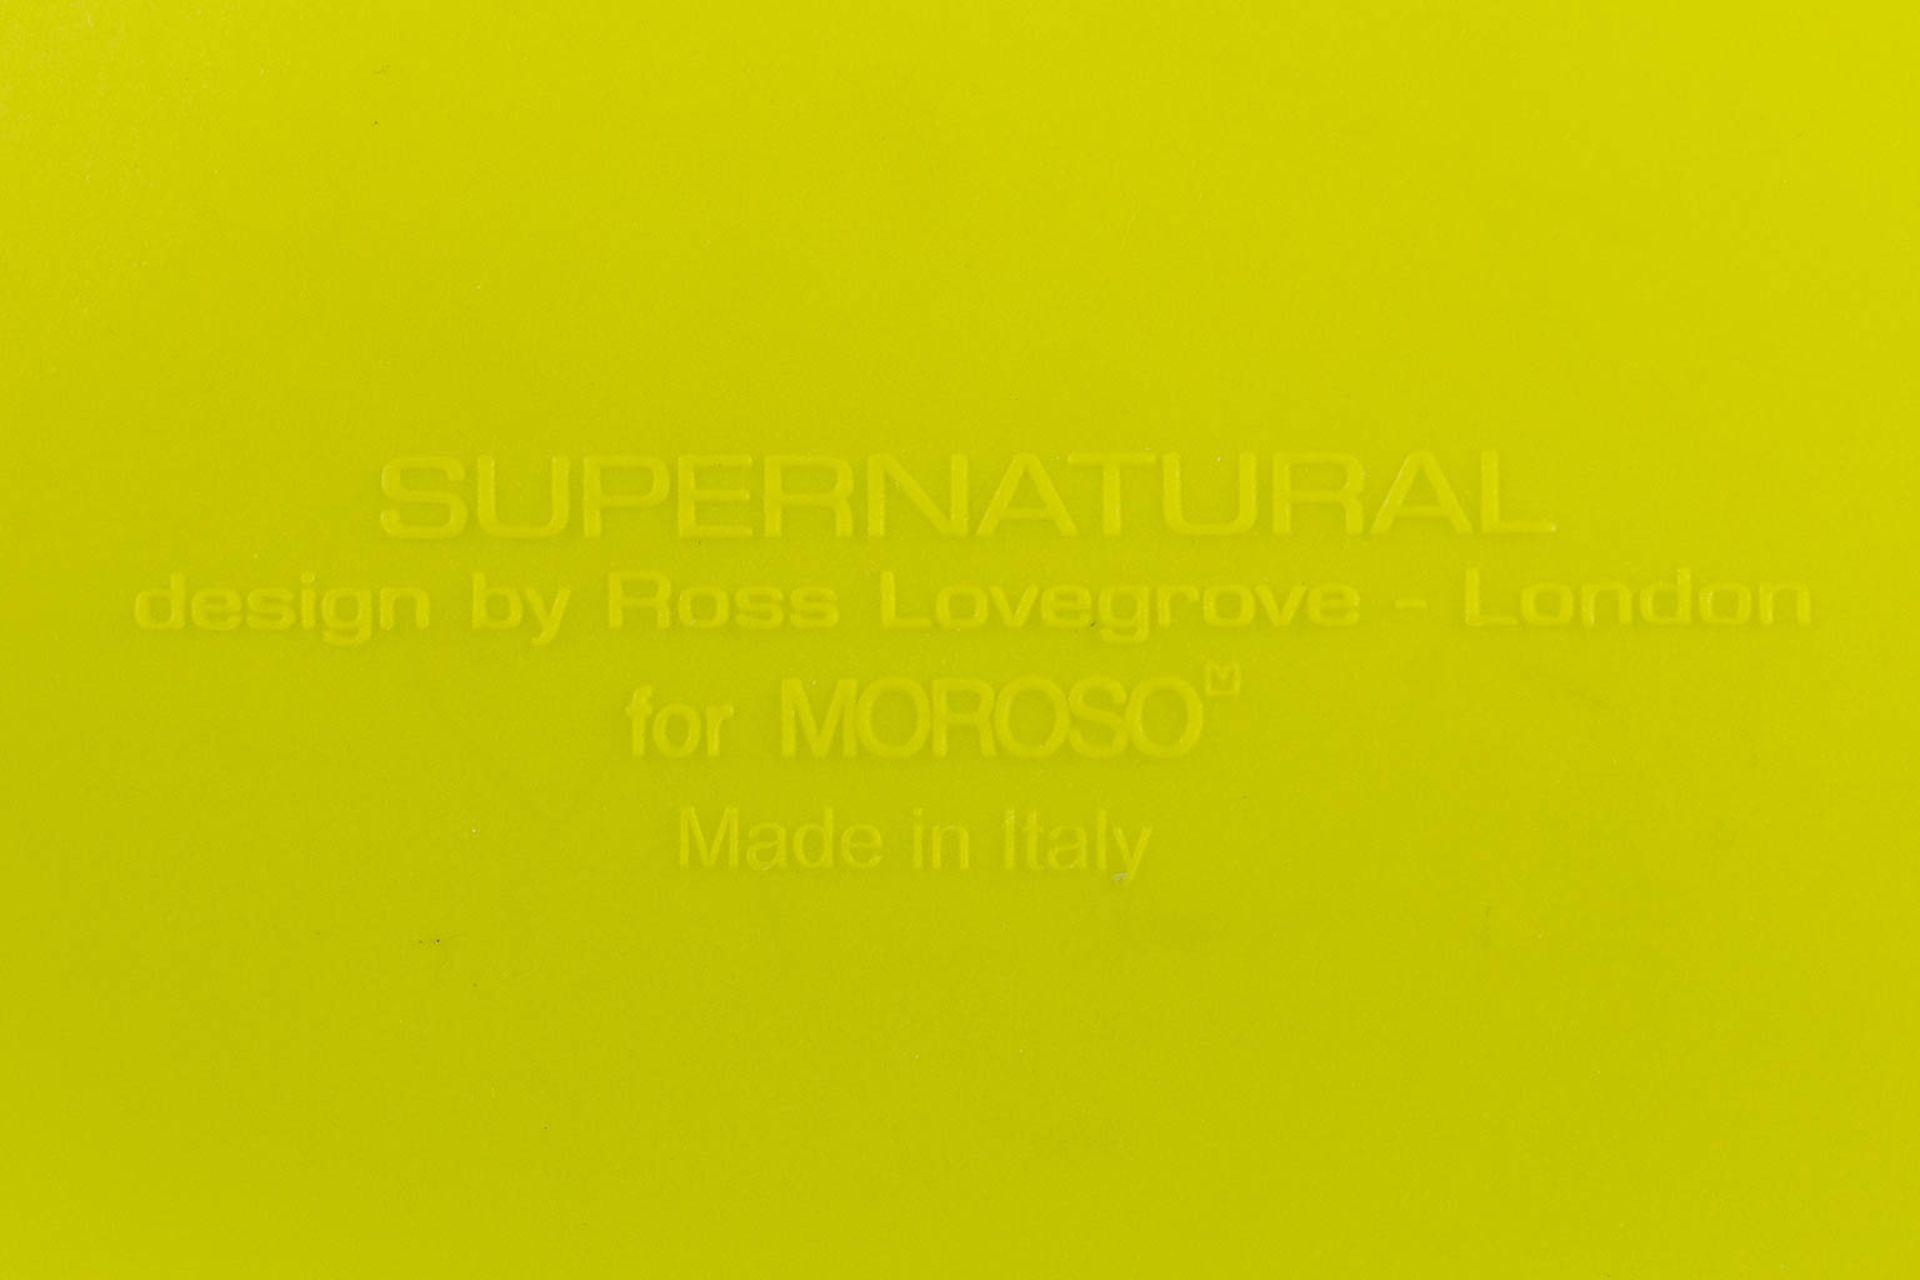 Ross LOVEGROVE (1958) 'Supernatural Chairs' (2005) for Morosso, Italy. (L:48 x W:48 x H:82 cm) - Bild 8 aus 11